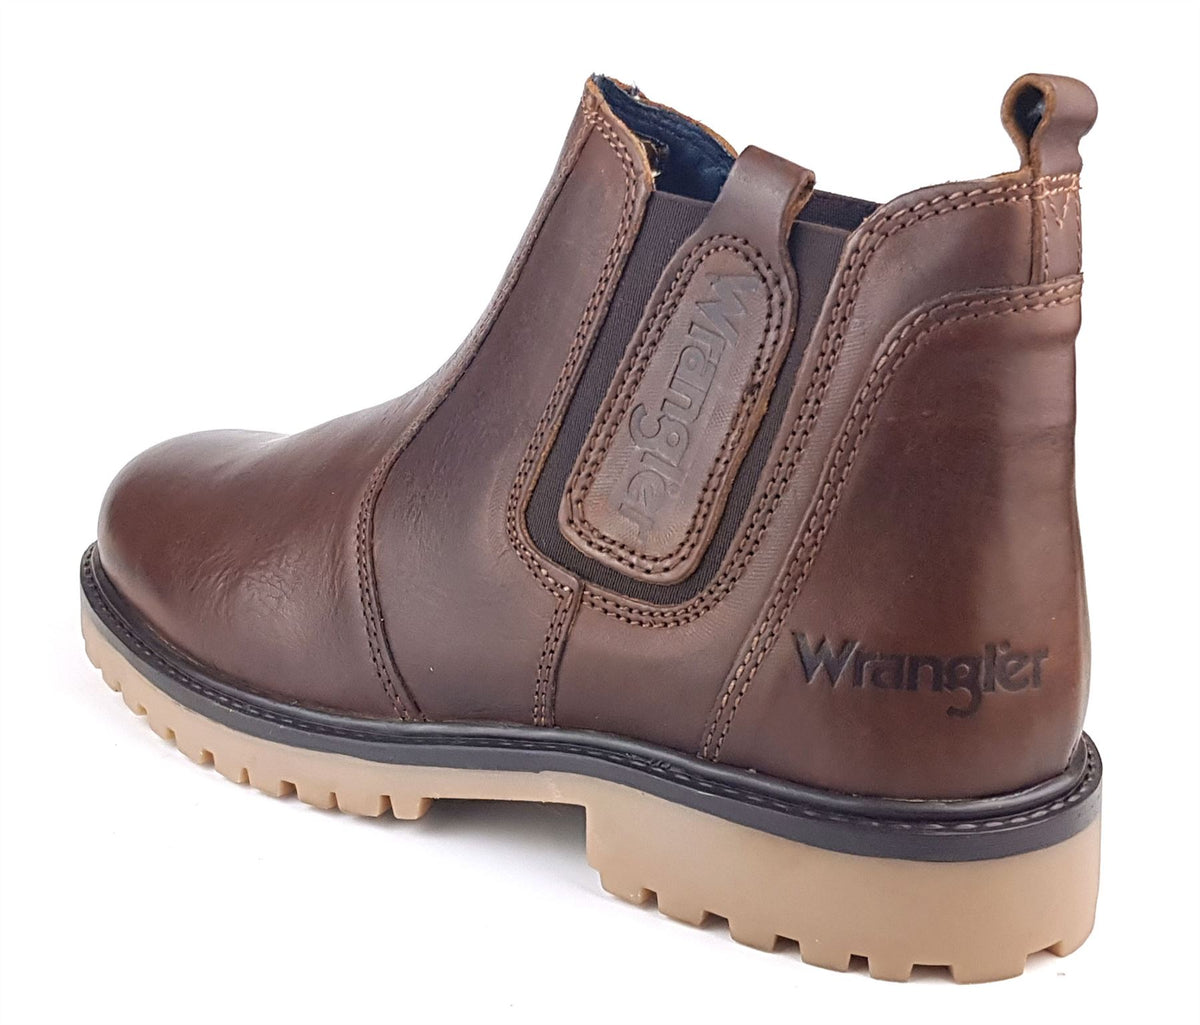 Wrangler Yuma Chelsea Ankle Leather Pull On Mens Boots